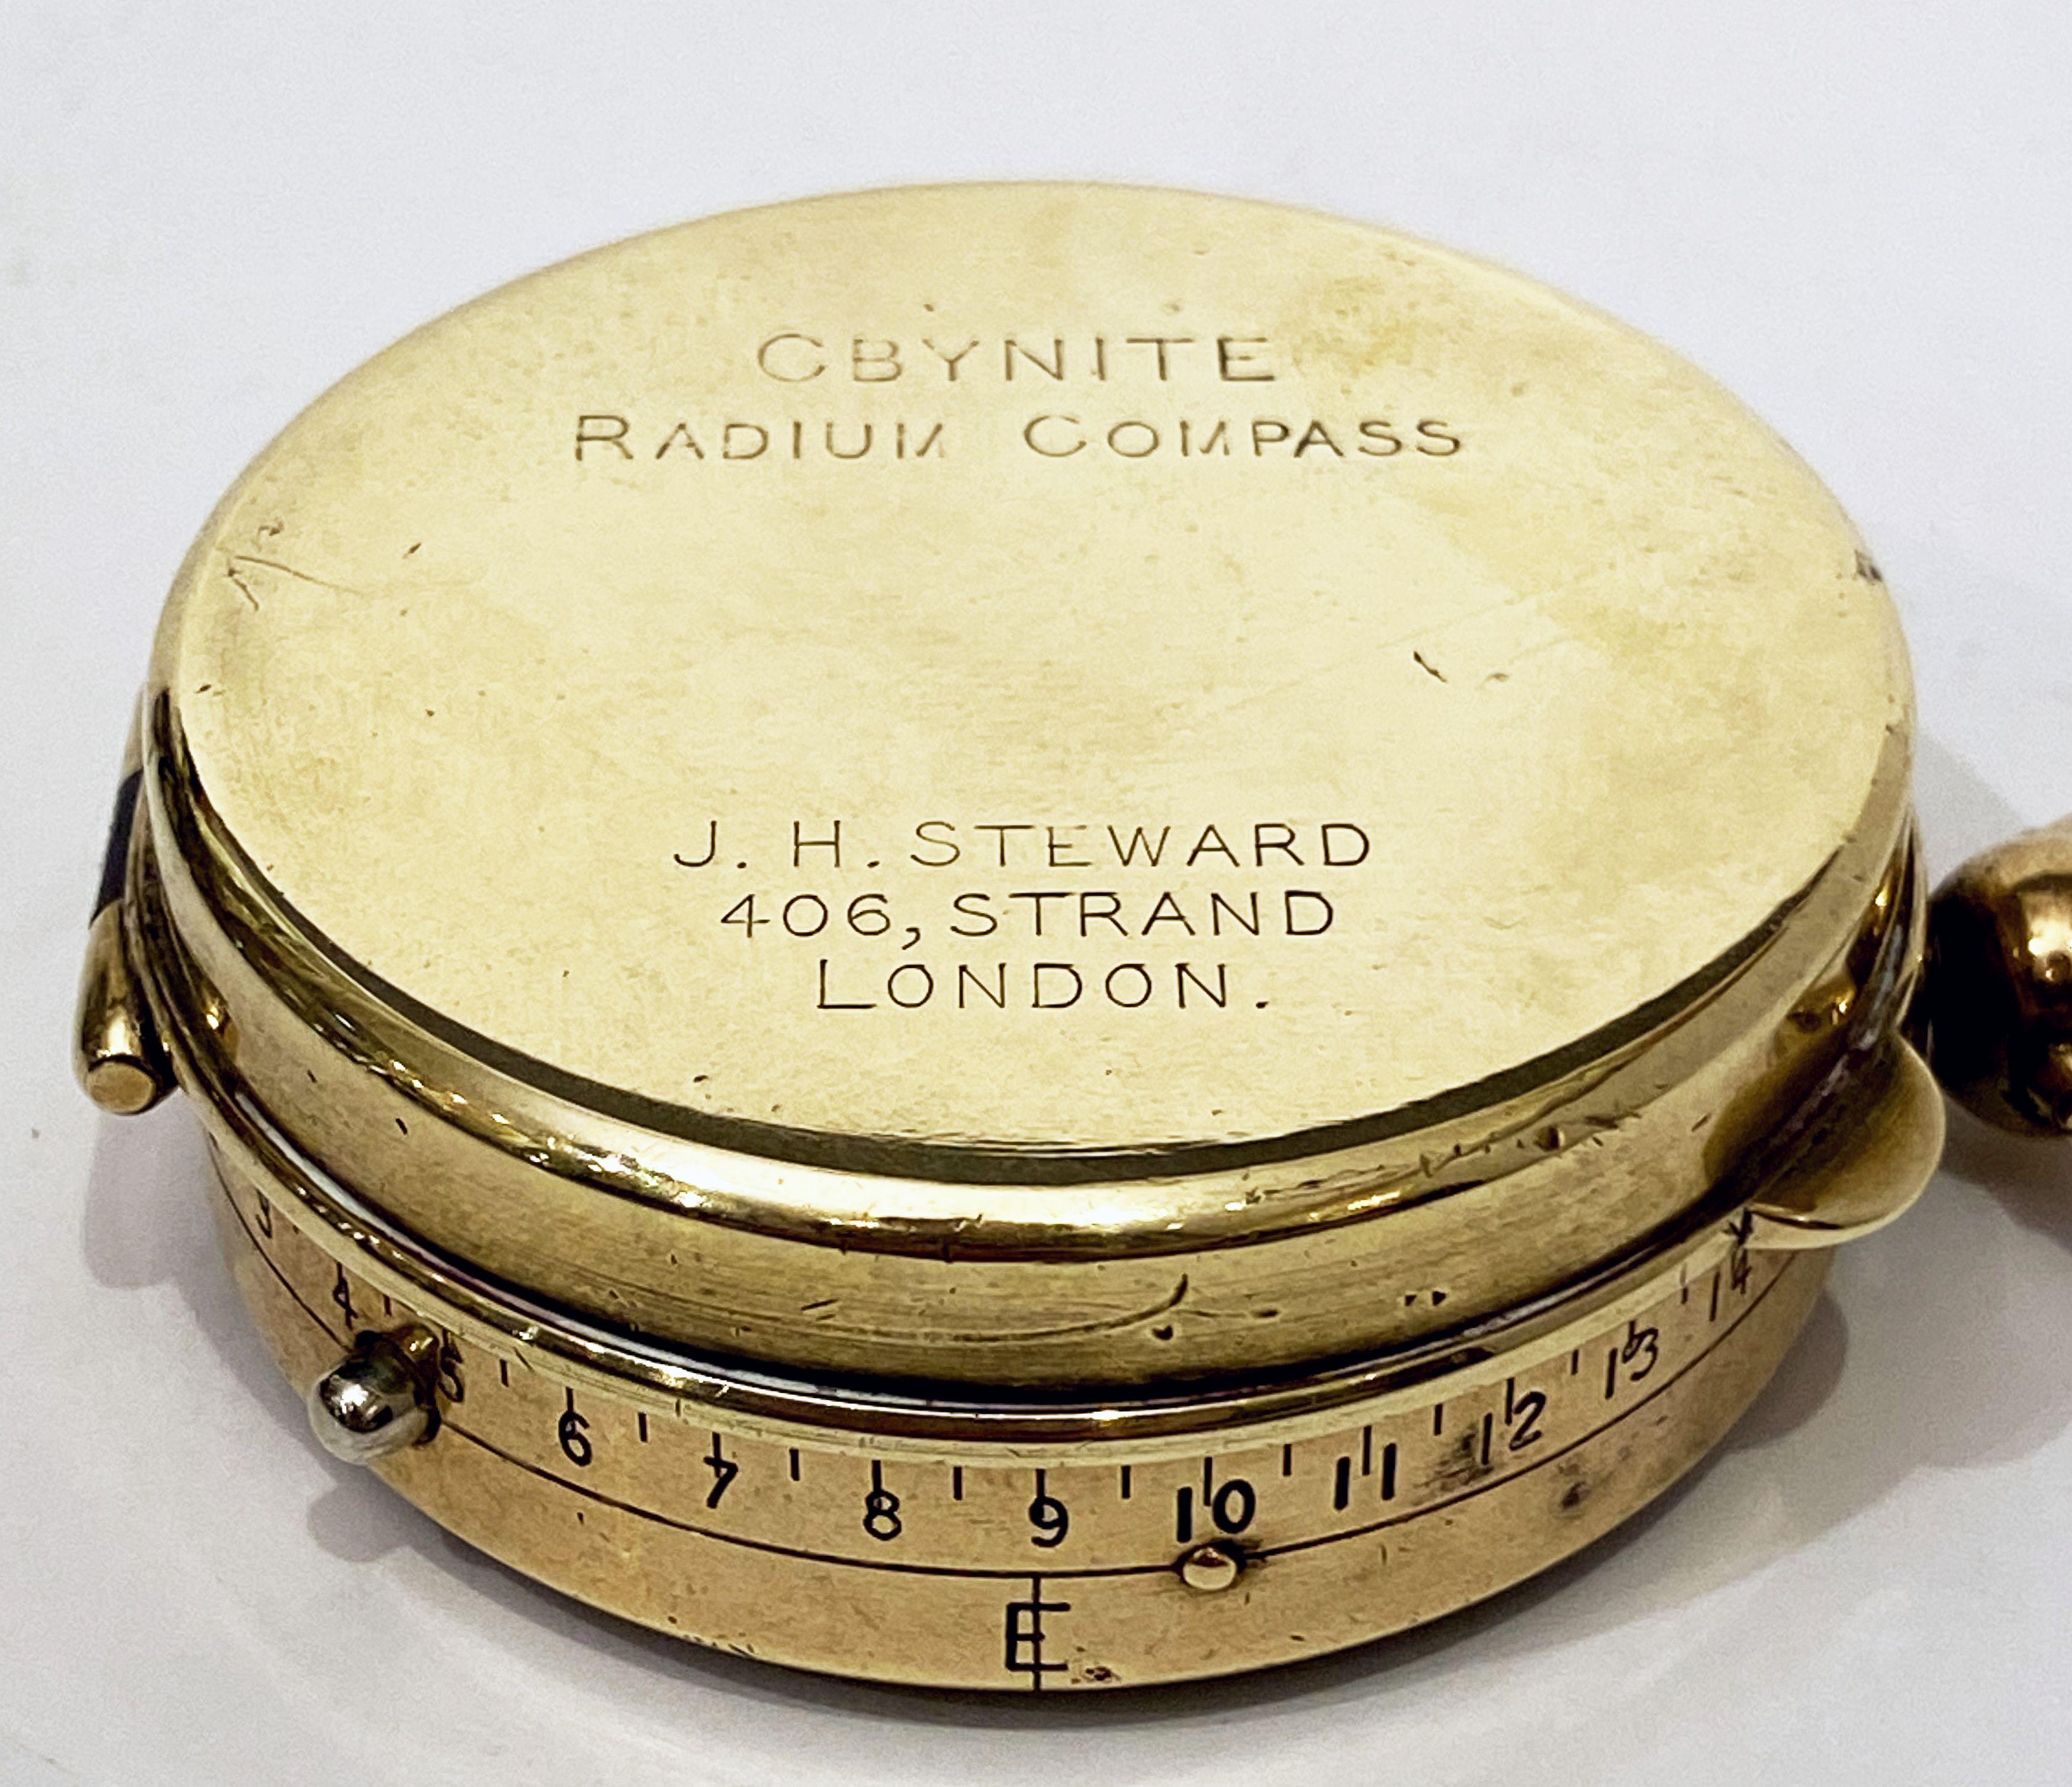 WWI Military Officer's Marching Compass, Cbynite Radium Compass 3